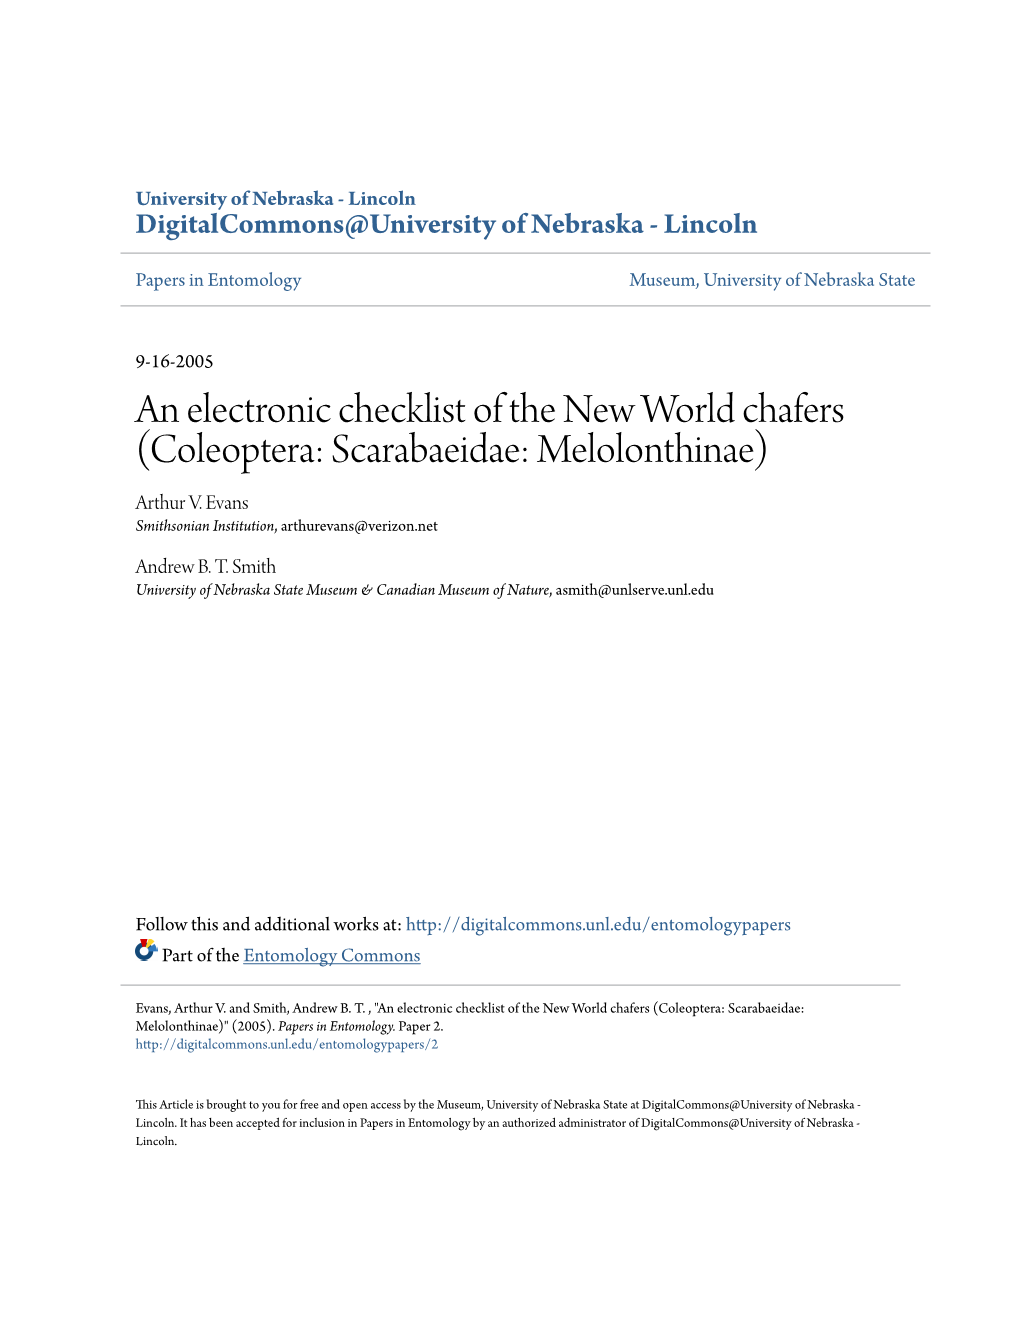 An Electronic Checklist of the New World Chafers (Coleoptera: Scarabaeidae: Melolonthinae) Arthur V